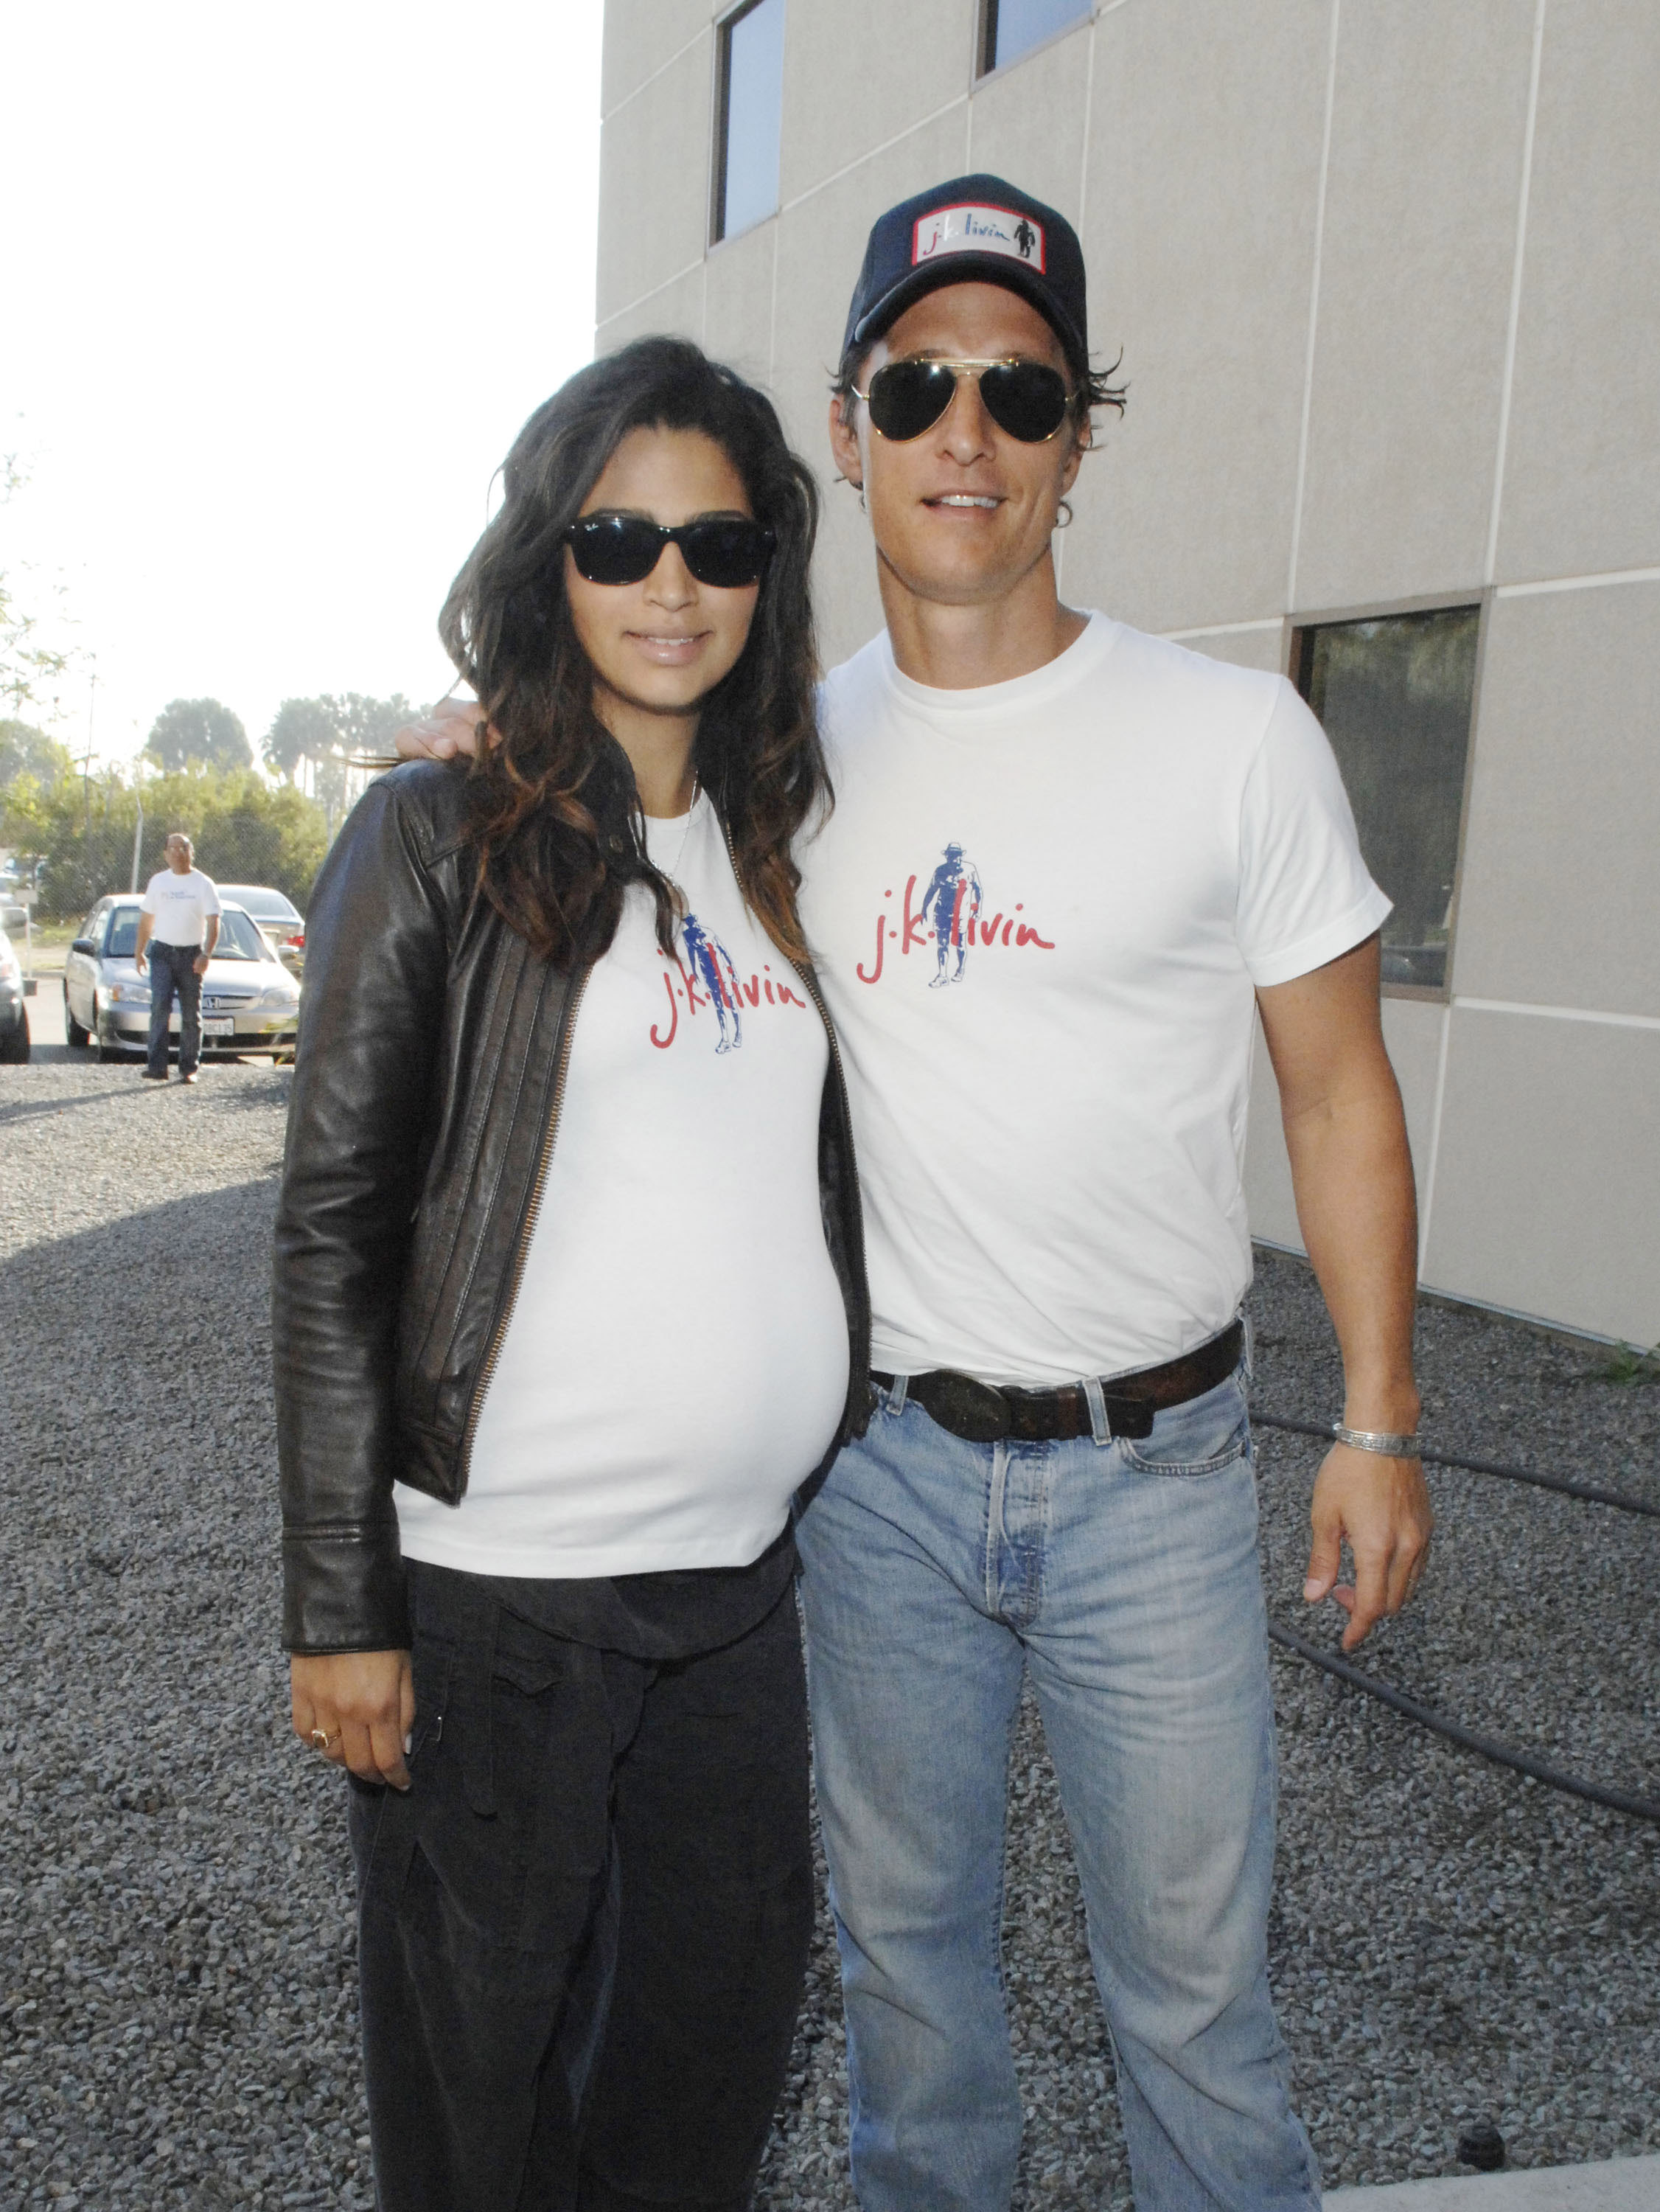 Camila Alves and Matthew McConaughey on October 24, 2009 in Van Nuys, California | Source: Getty Images